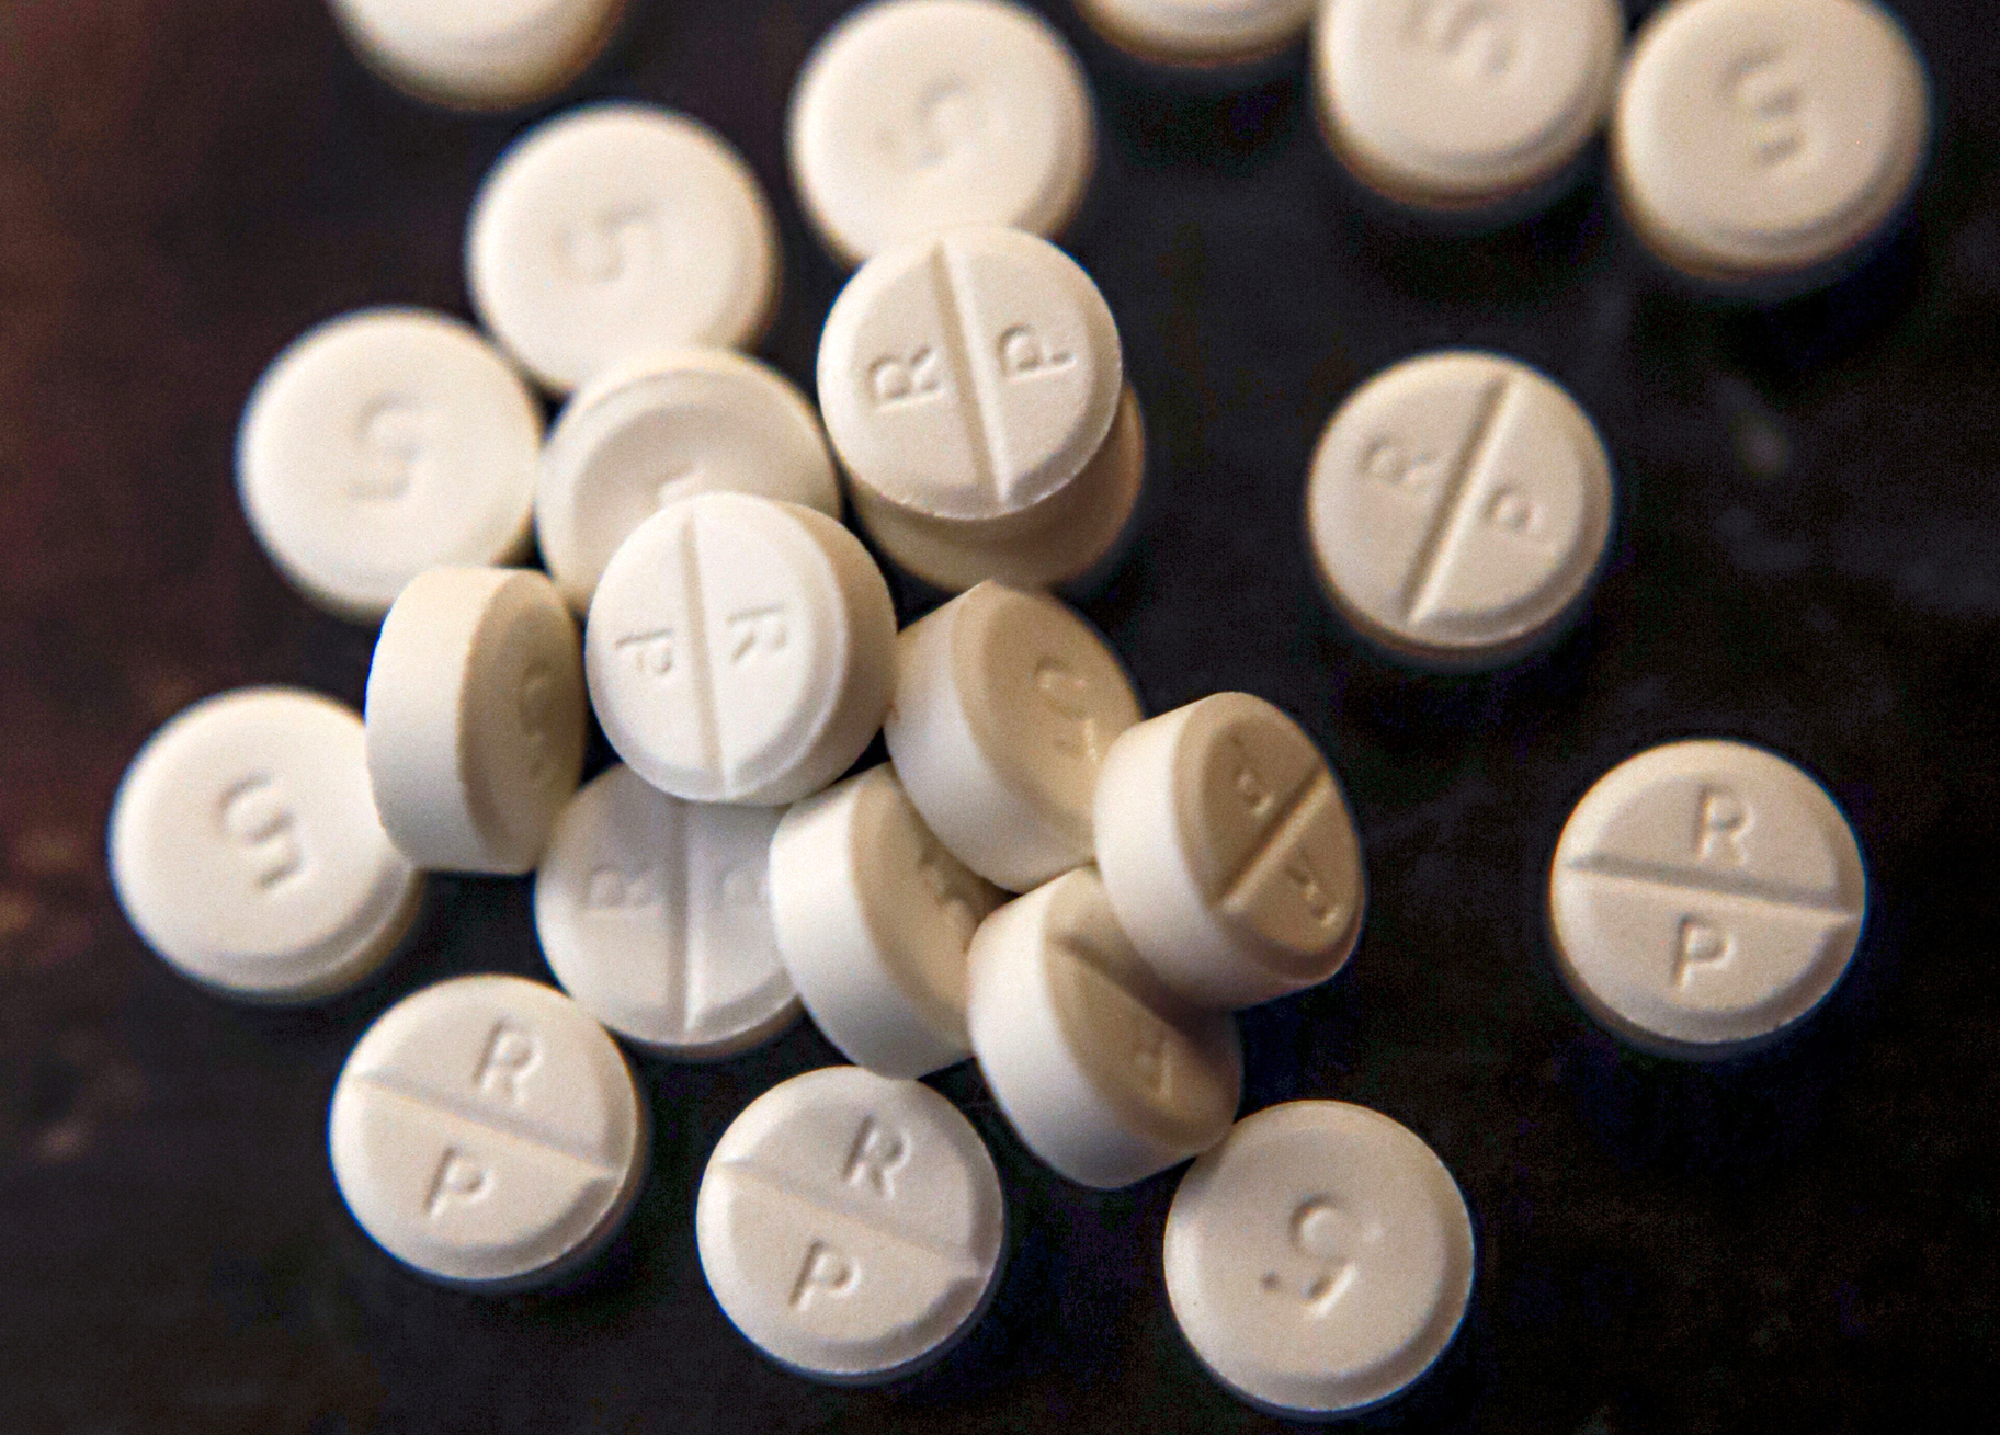 Wisconsin opioid deaths hit another record high in 2021